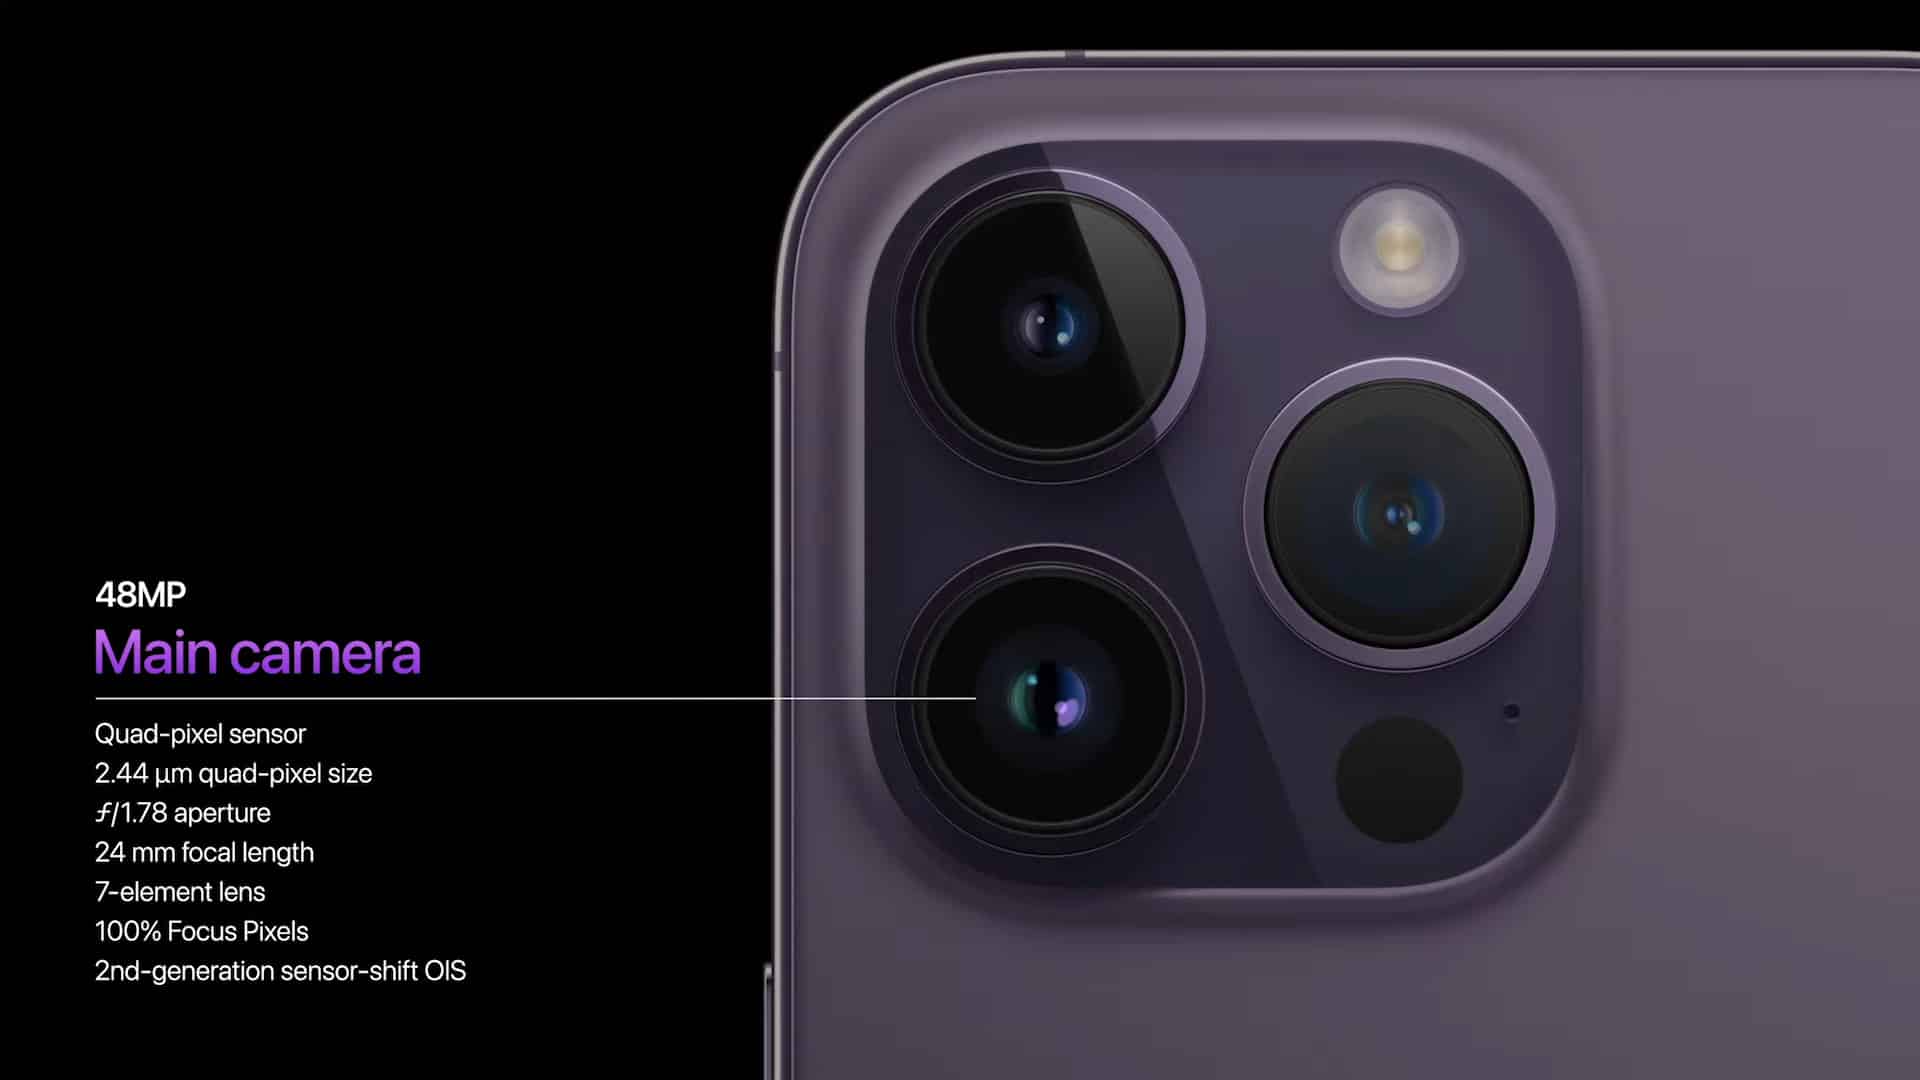 Camera upgrades to iPhone 14 Pro and 14 Pro Max